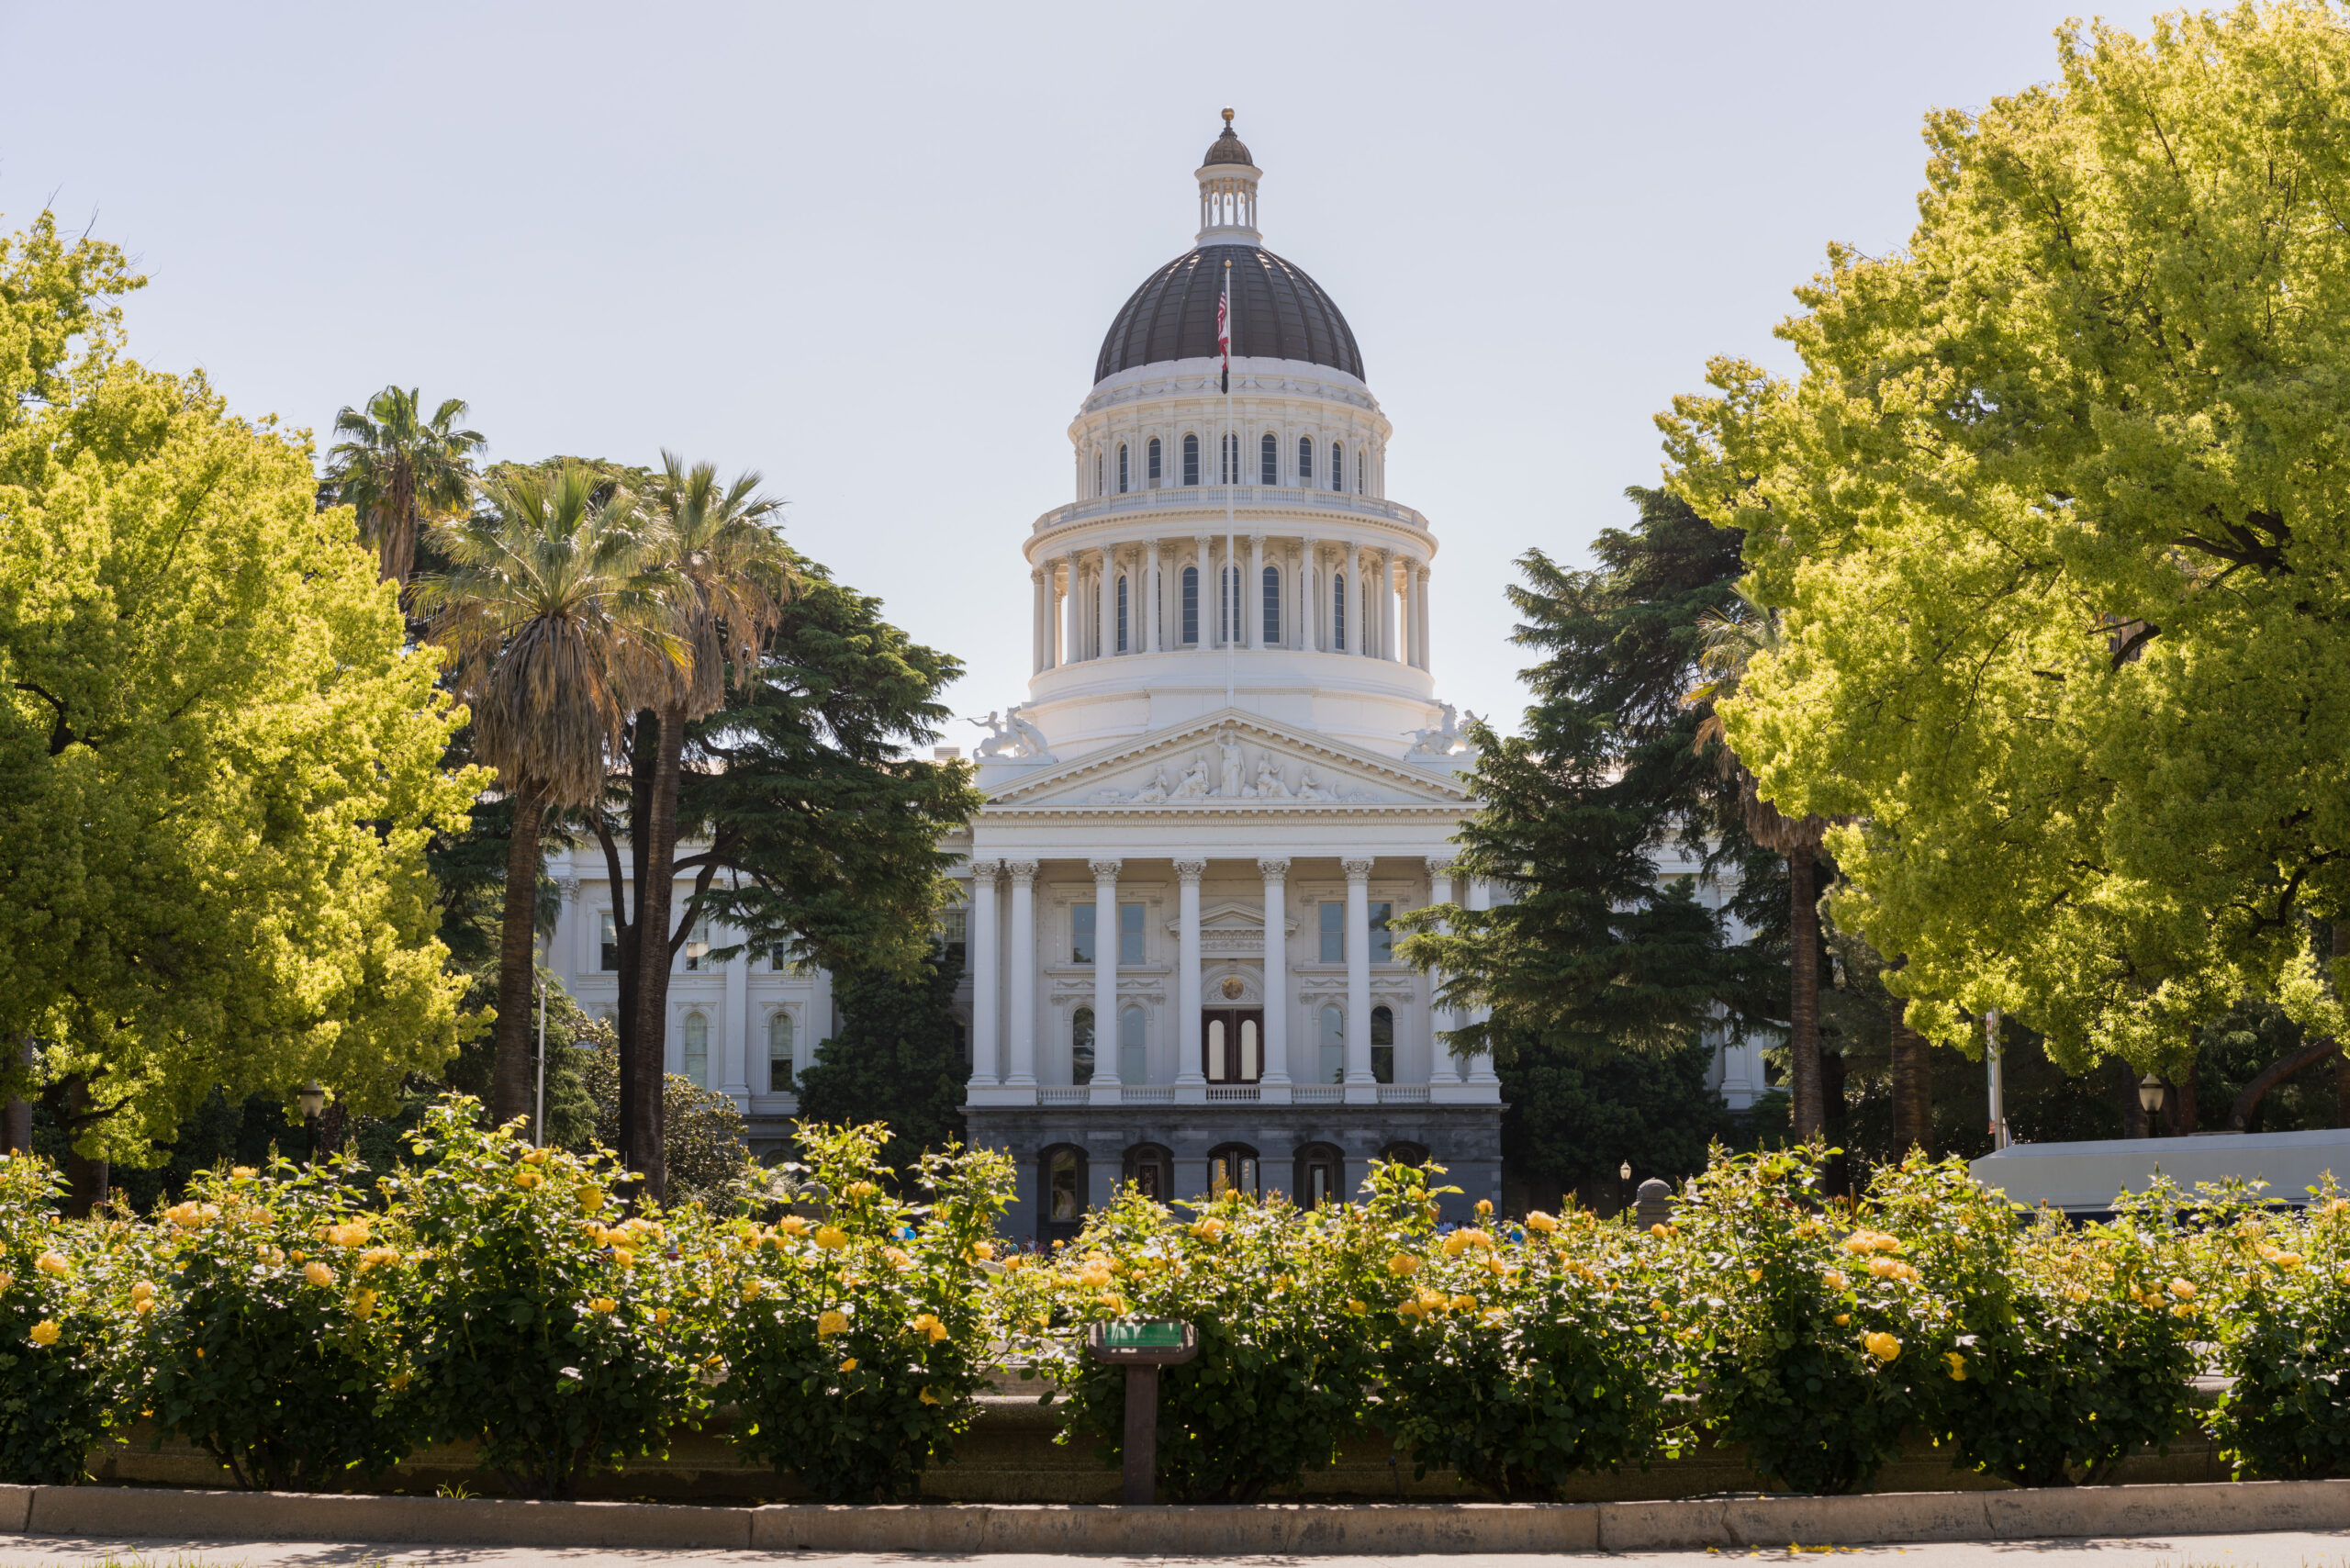 California SB 58 proposes constructive reforms, but could go farther